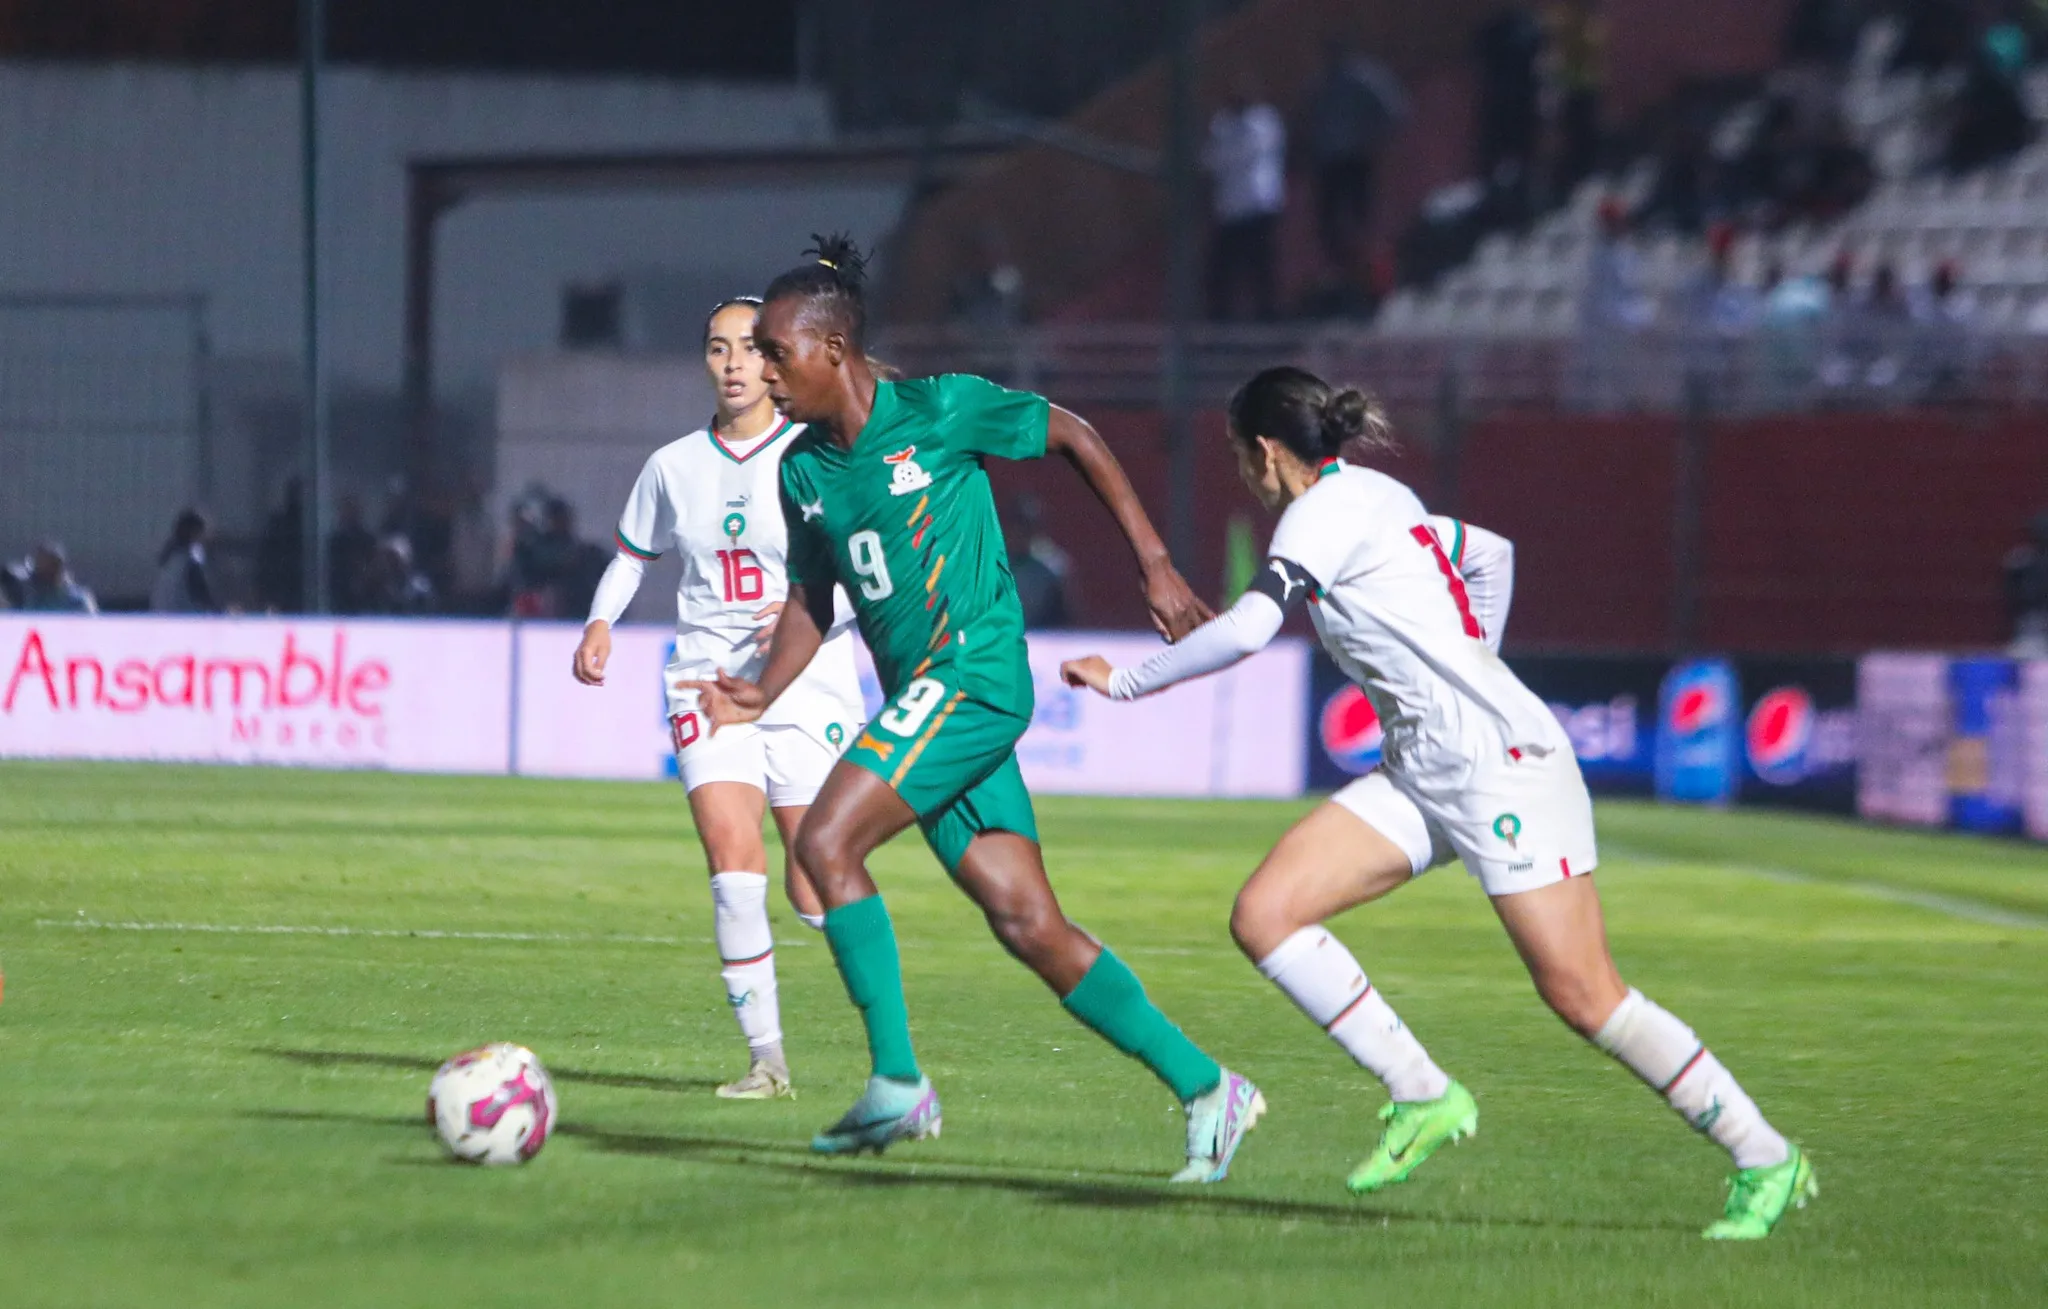 Paris 2024: Zambia's Copper Queens Ready to Shine on World Stage